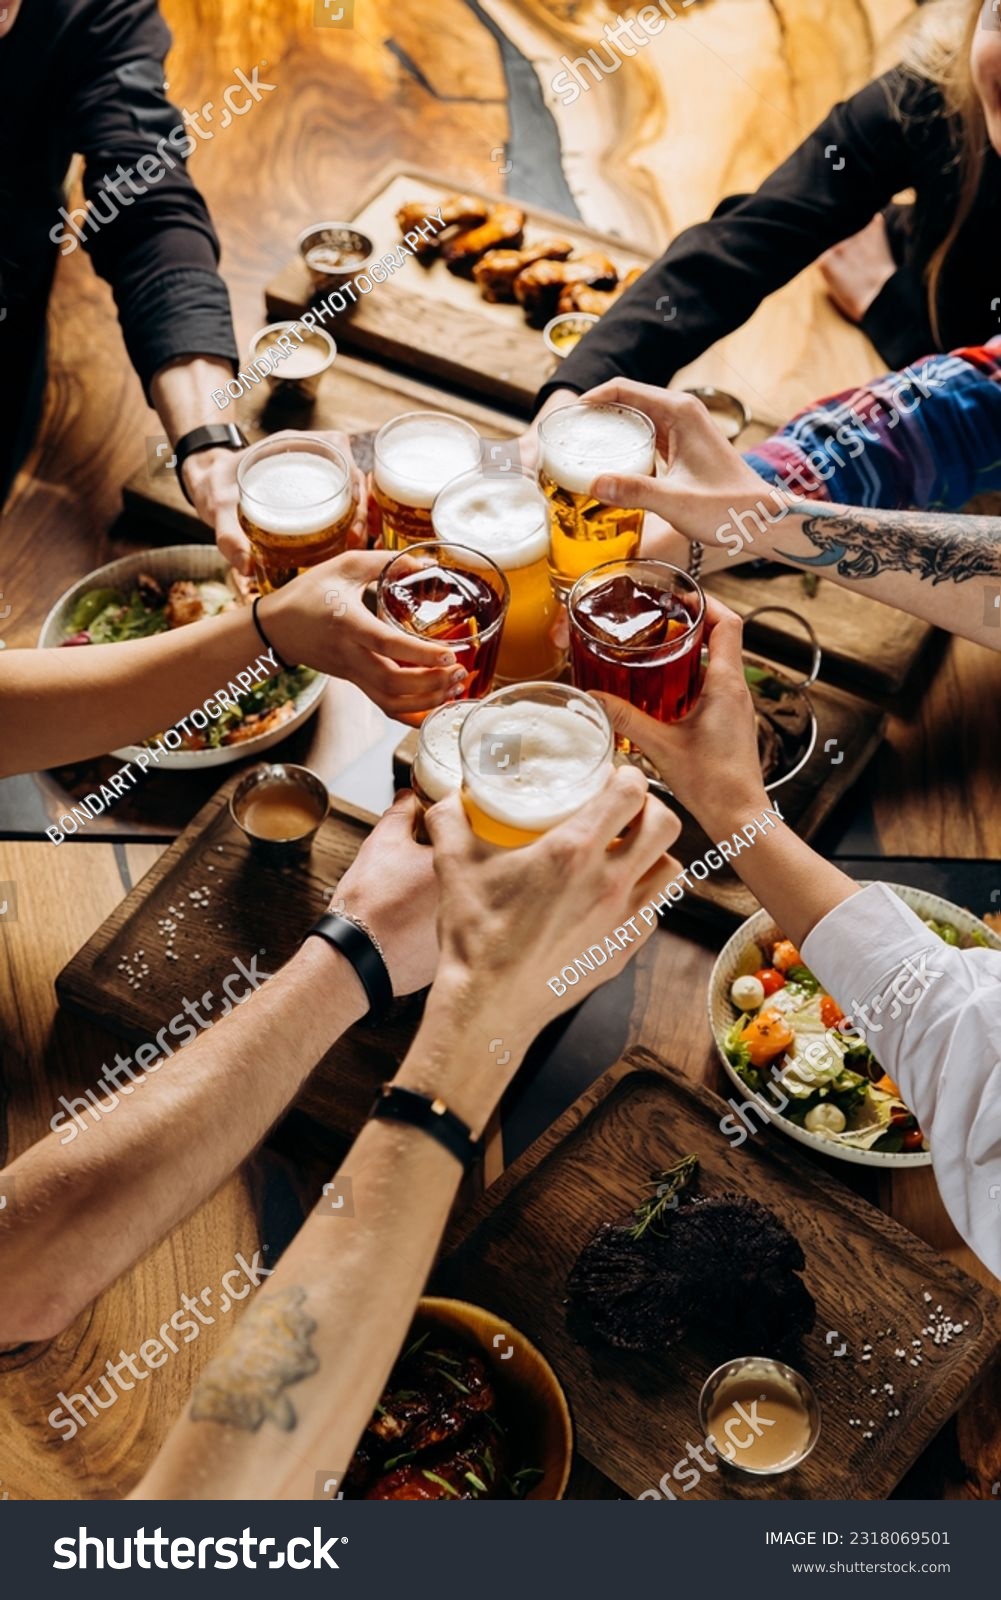 Friends cheering beer glasses on wooden table covered with delicious food - Top view of people having dinner party at bar restaurant - Food and beverage lifestyle concept #2318069501